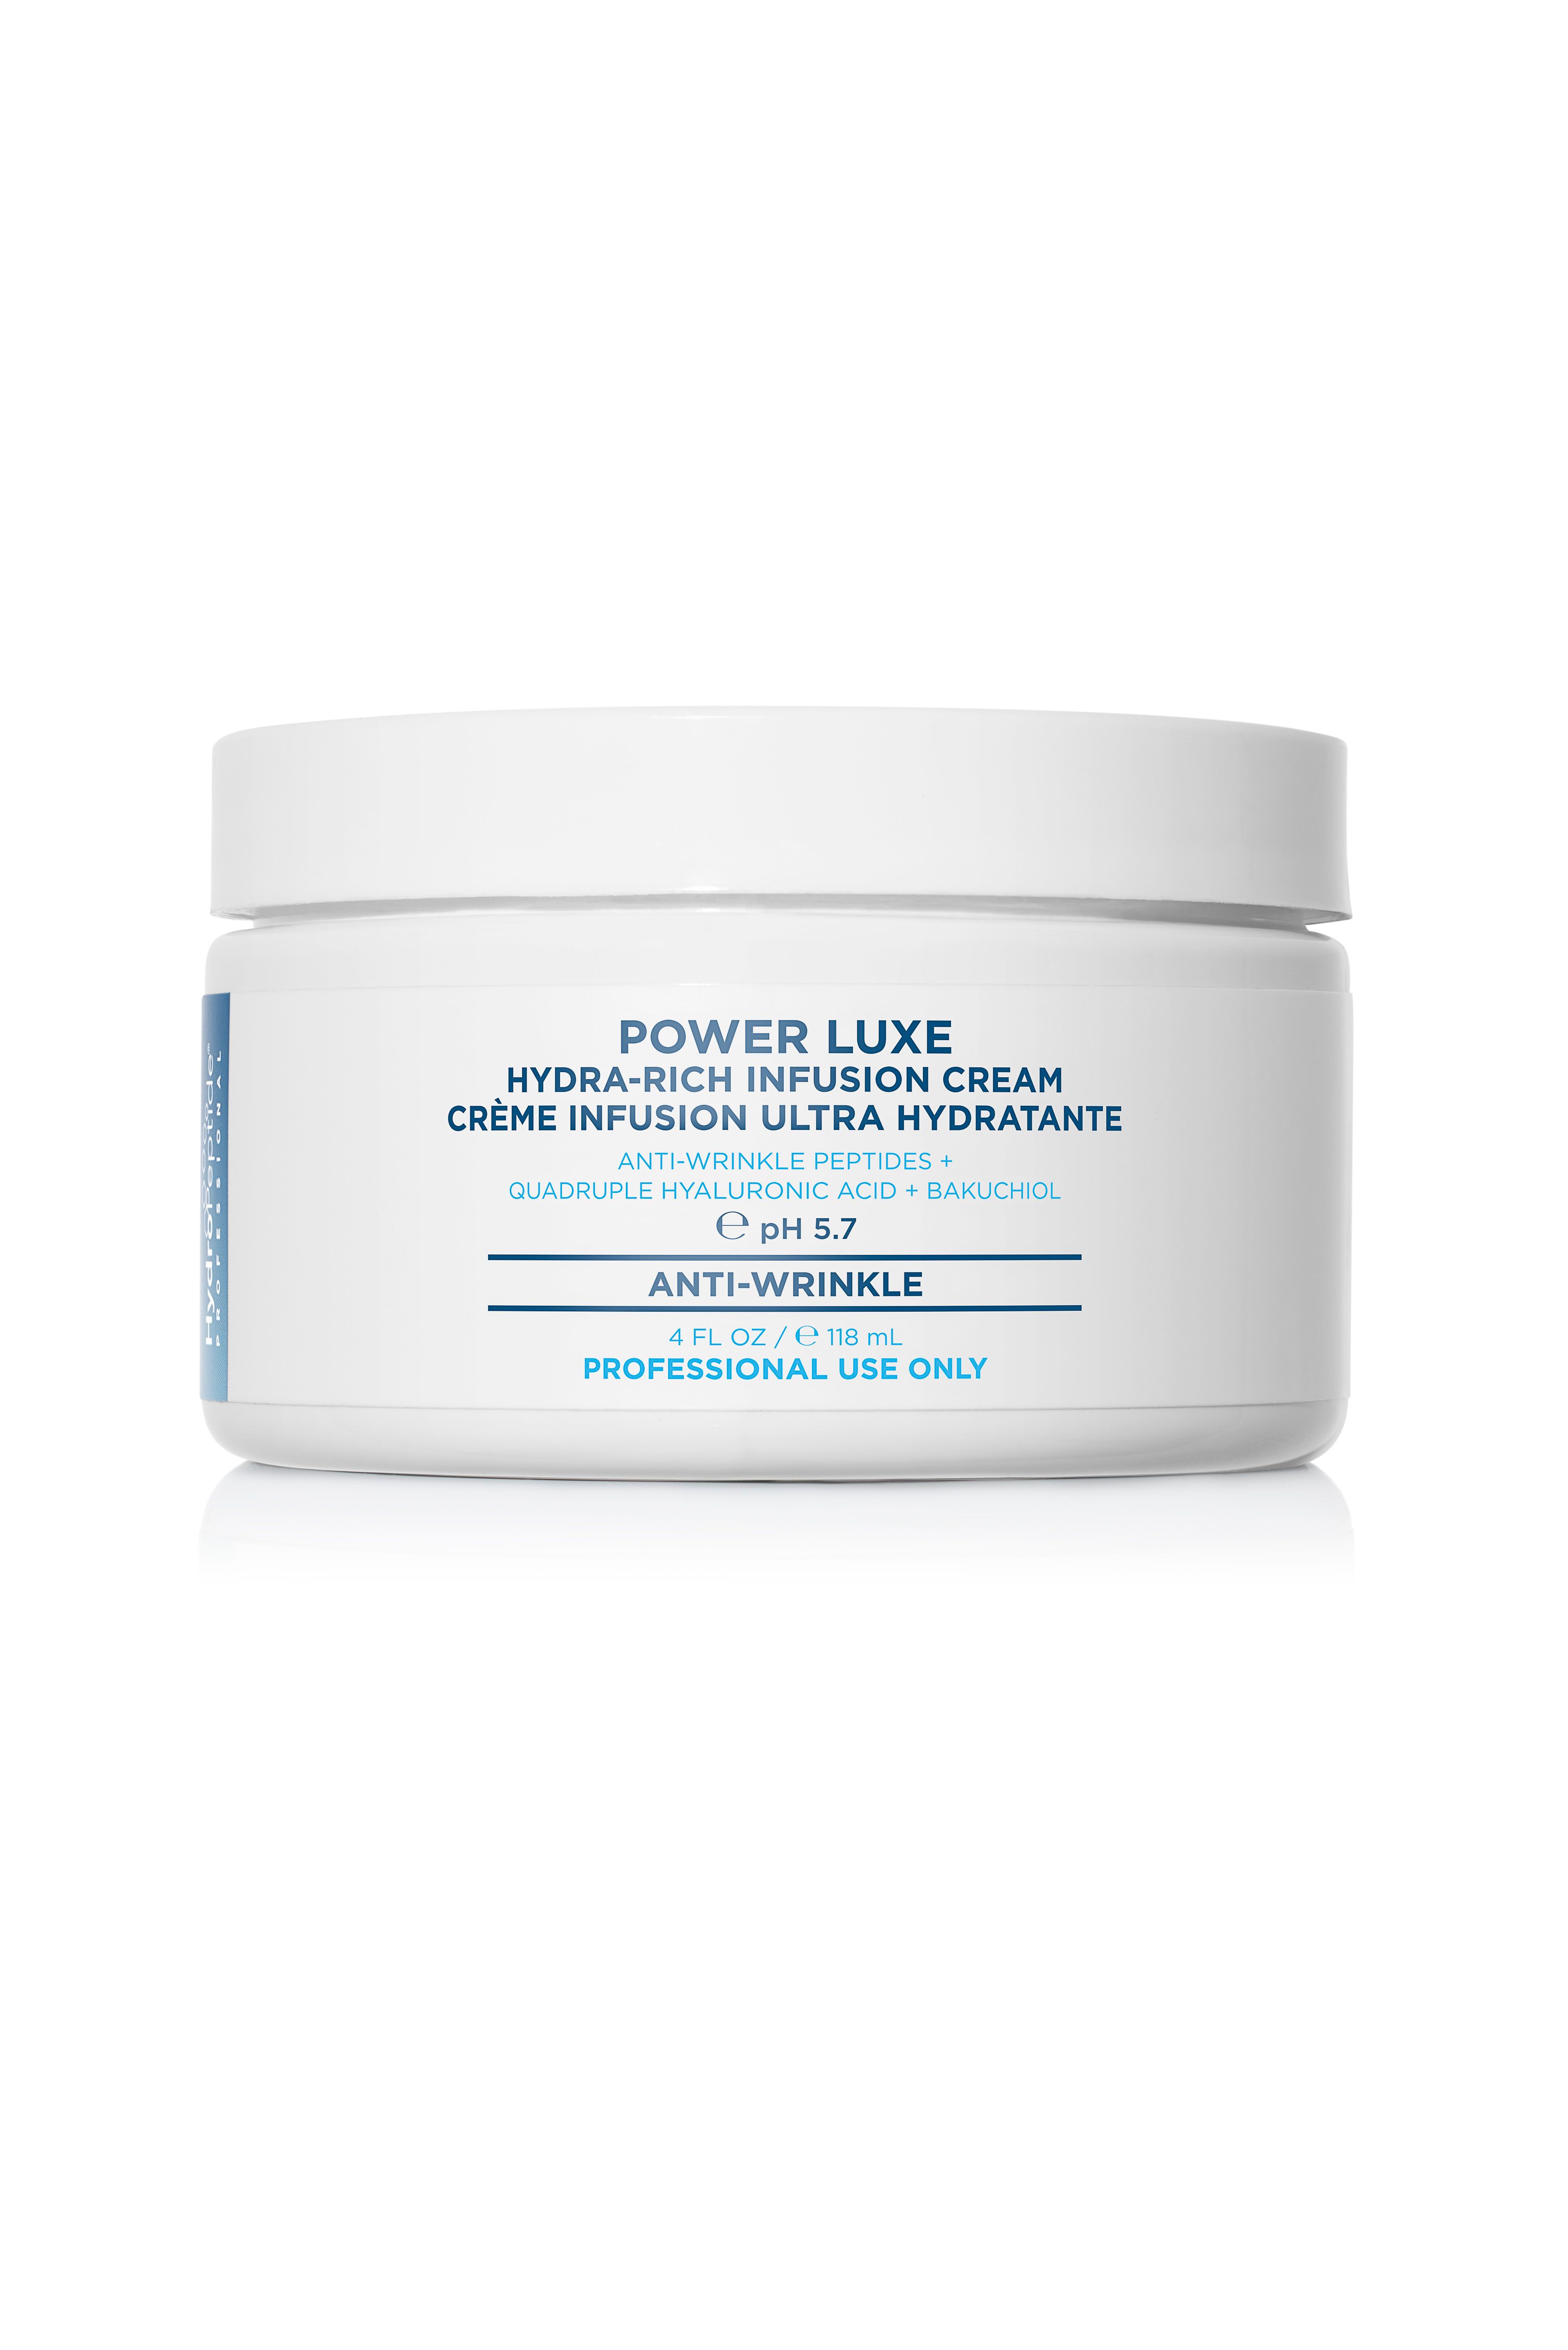 Hydropeptide PROFESSIONAL  POWER LUXE,  118 ml